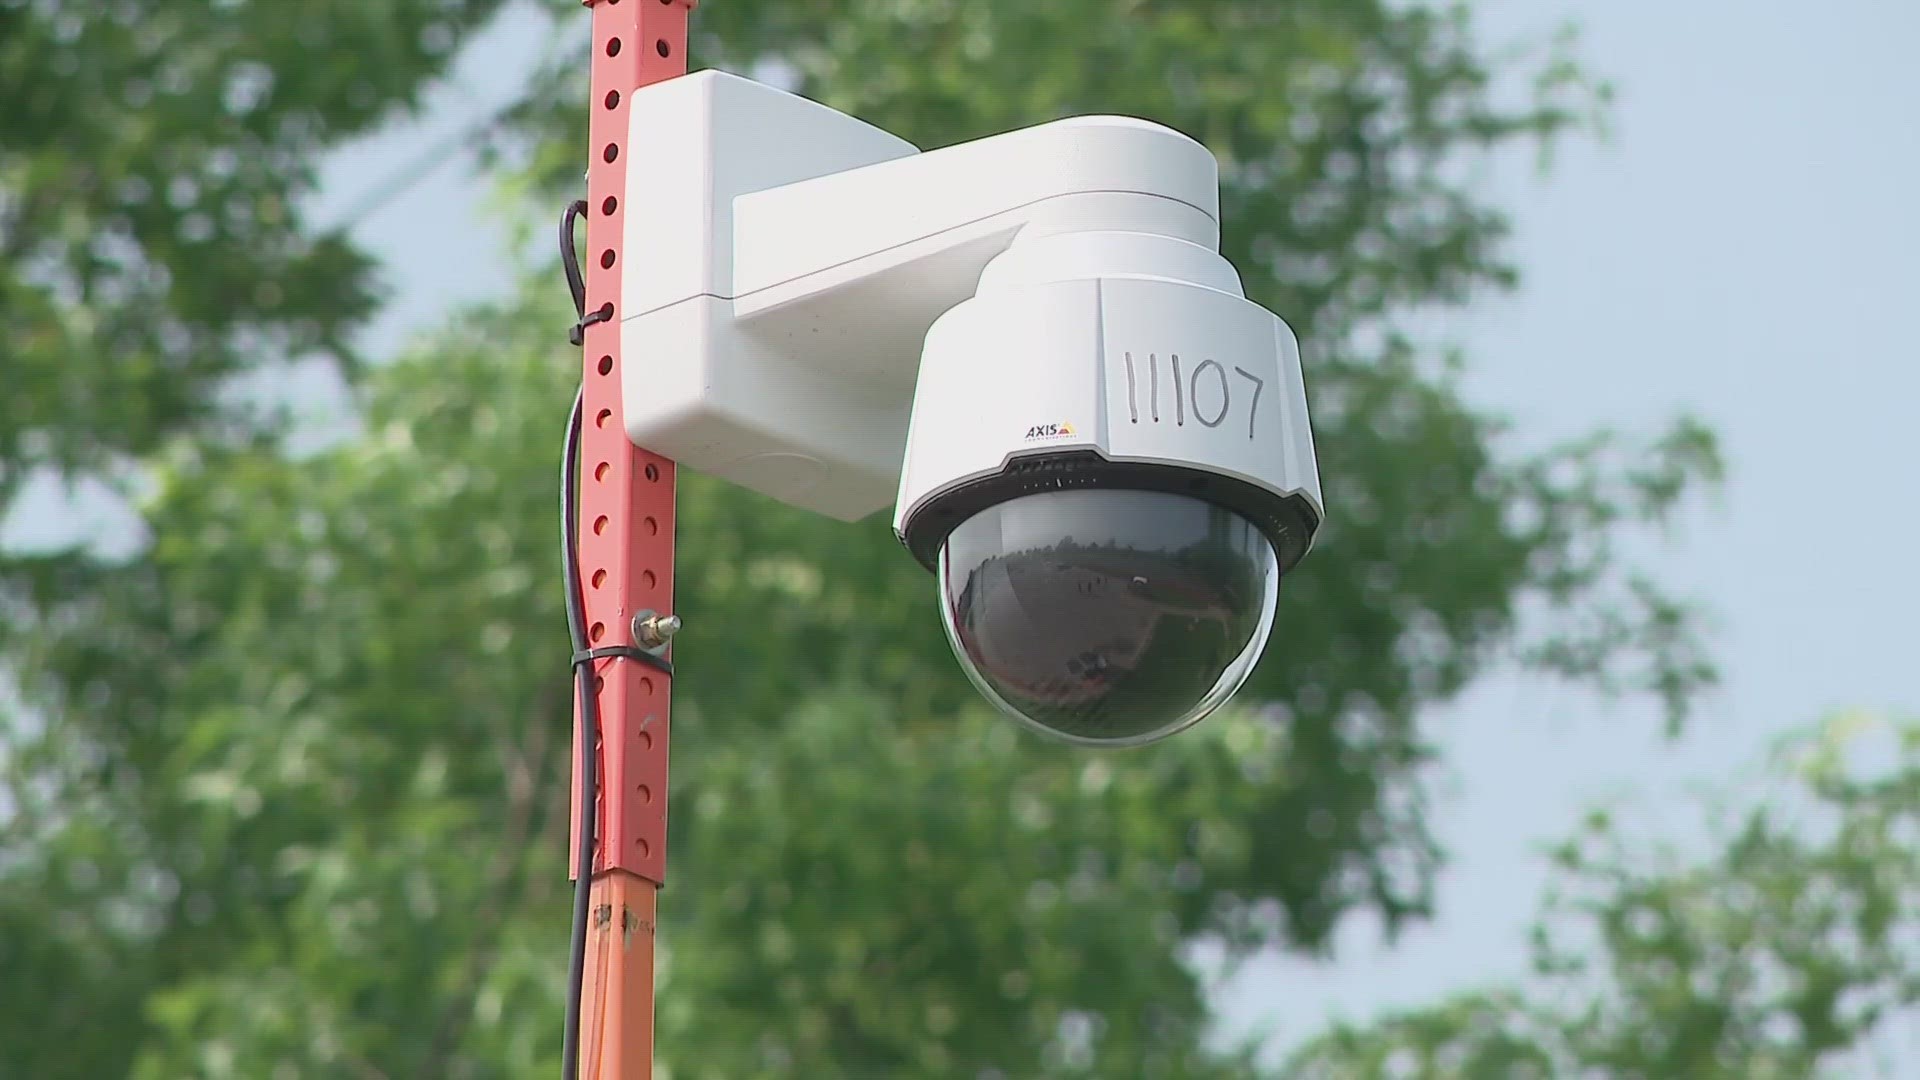 One man who runs a nonprofit expressed his concern about a camera being temporarily removed from Westgate Park over the weekend to the Short North.